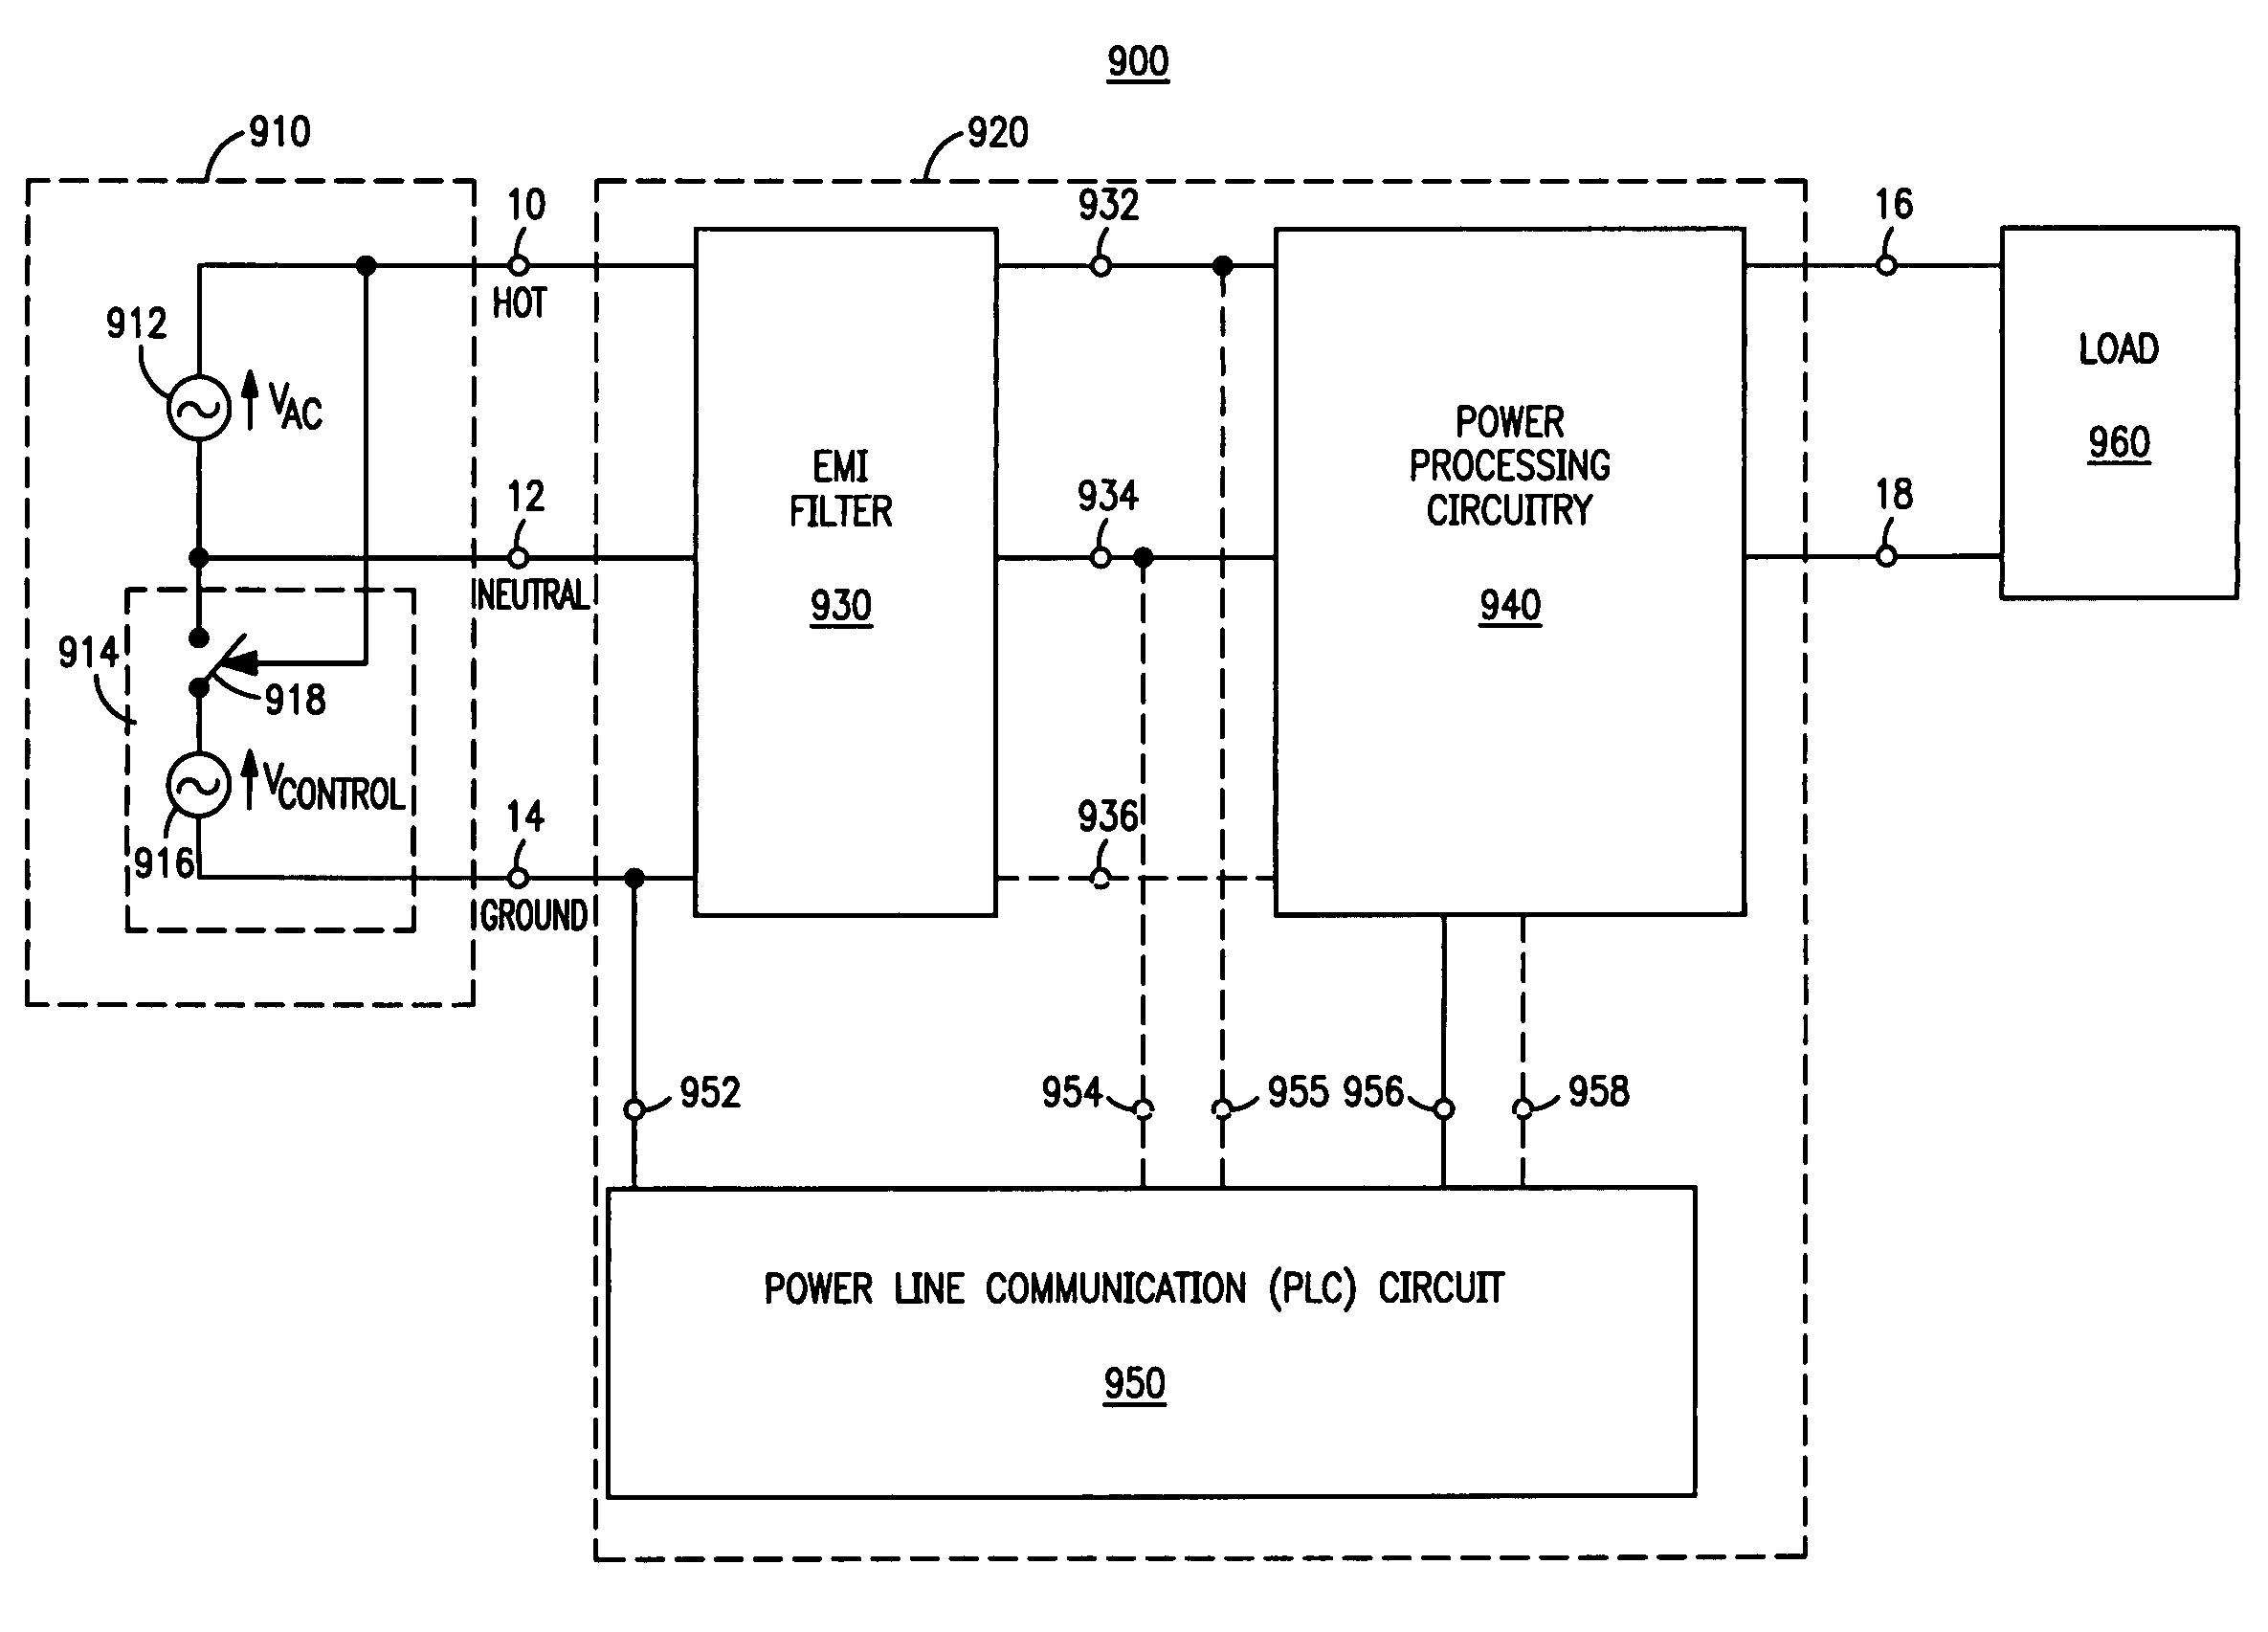 Arrangement and method for providing power line communication from an AC power source to a circuit for powering a load, and electronic ballasts therefor